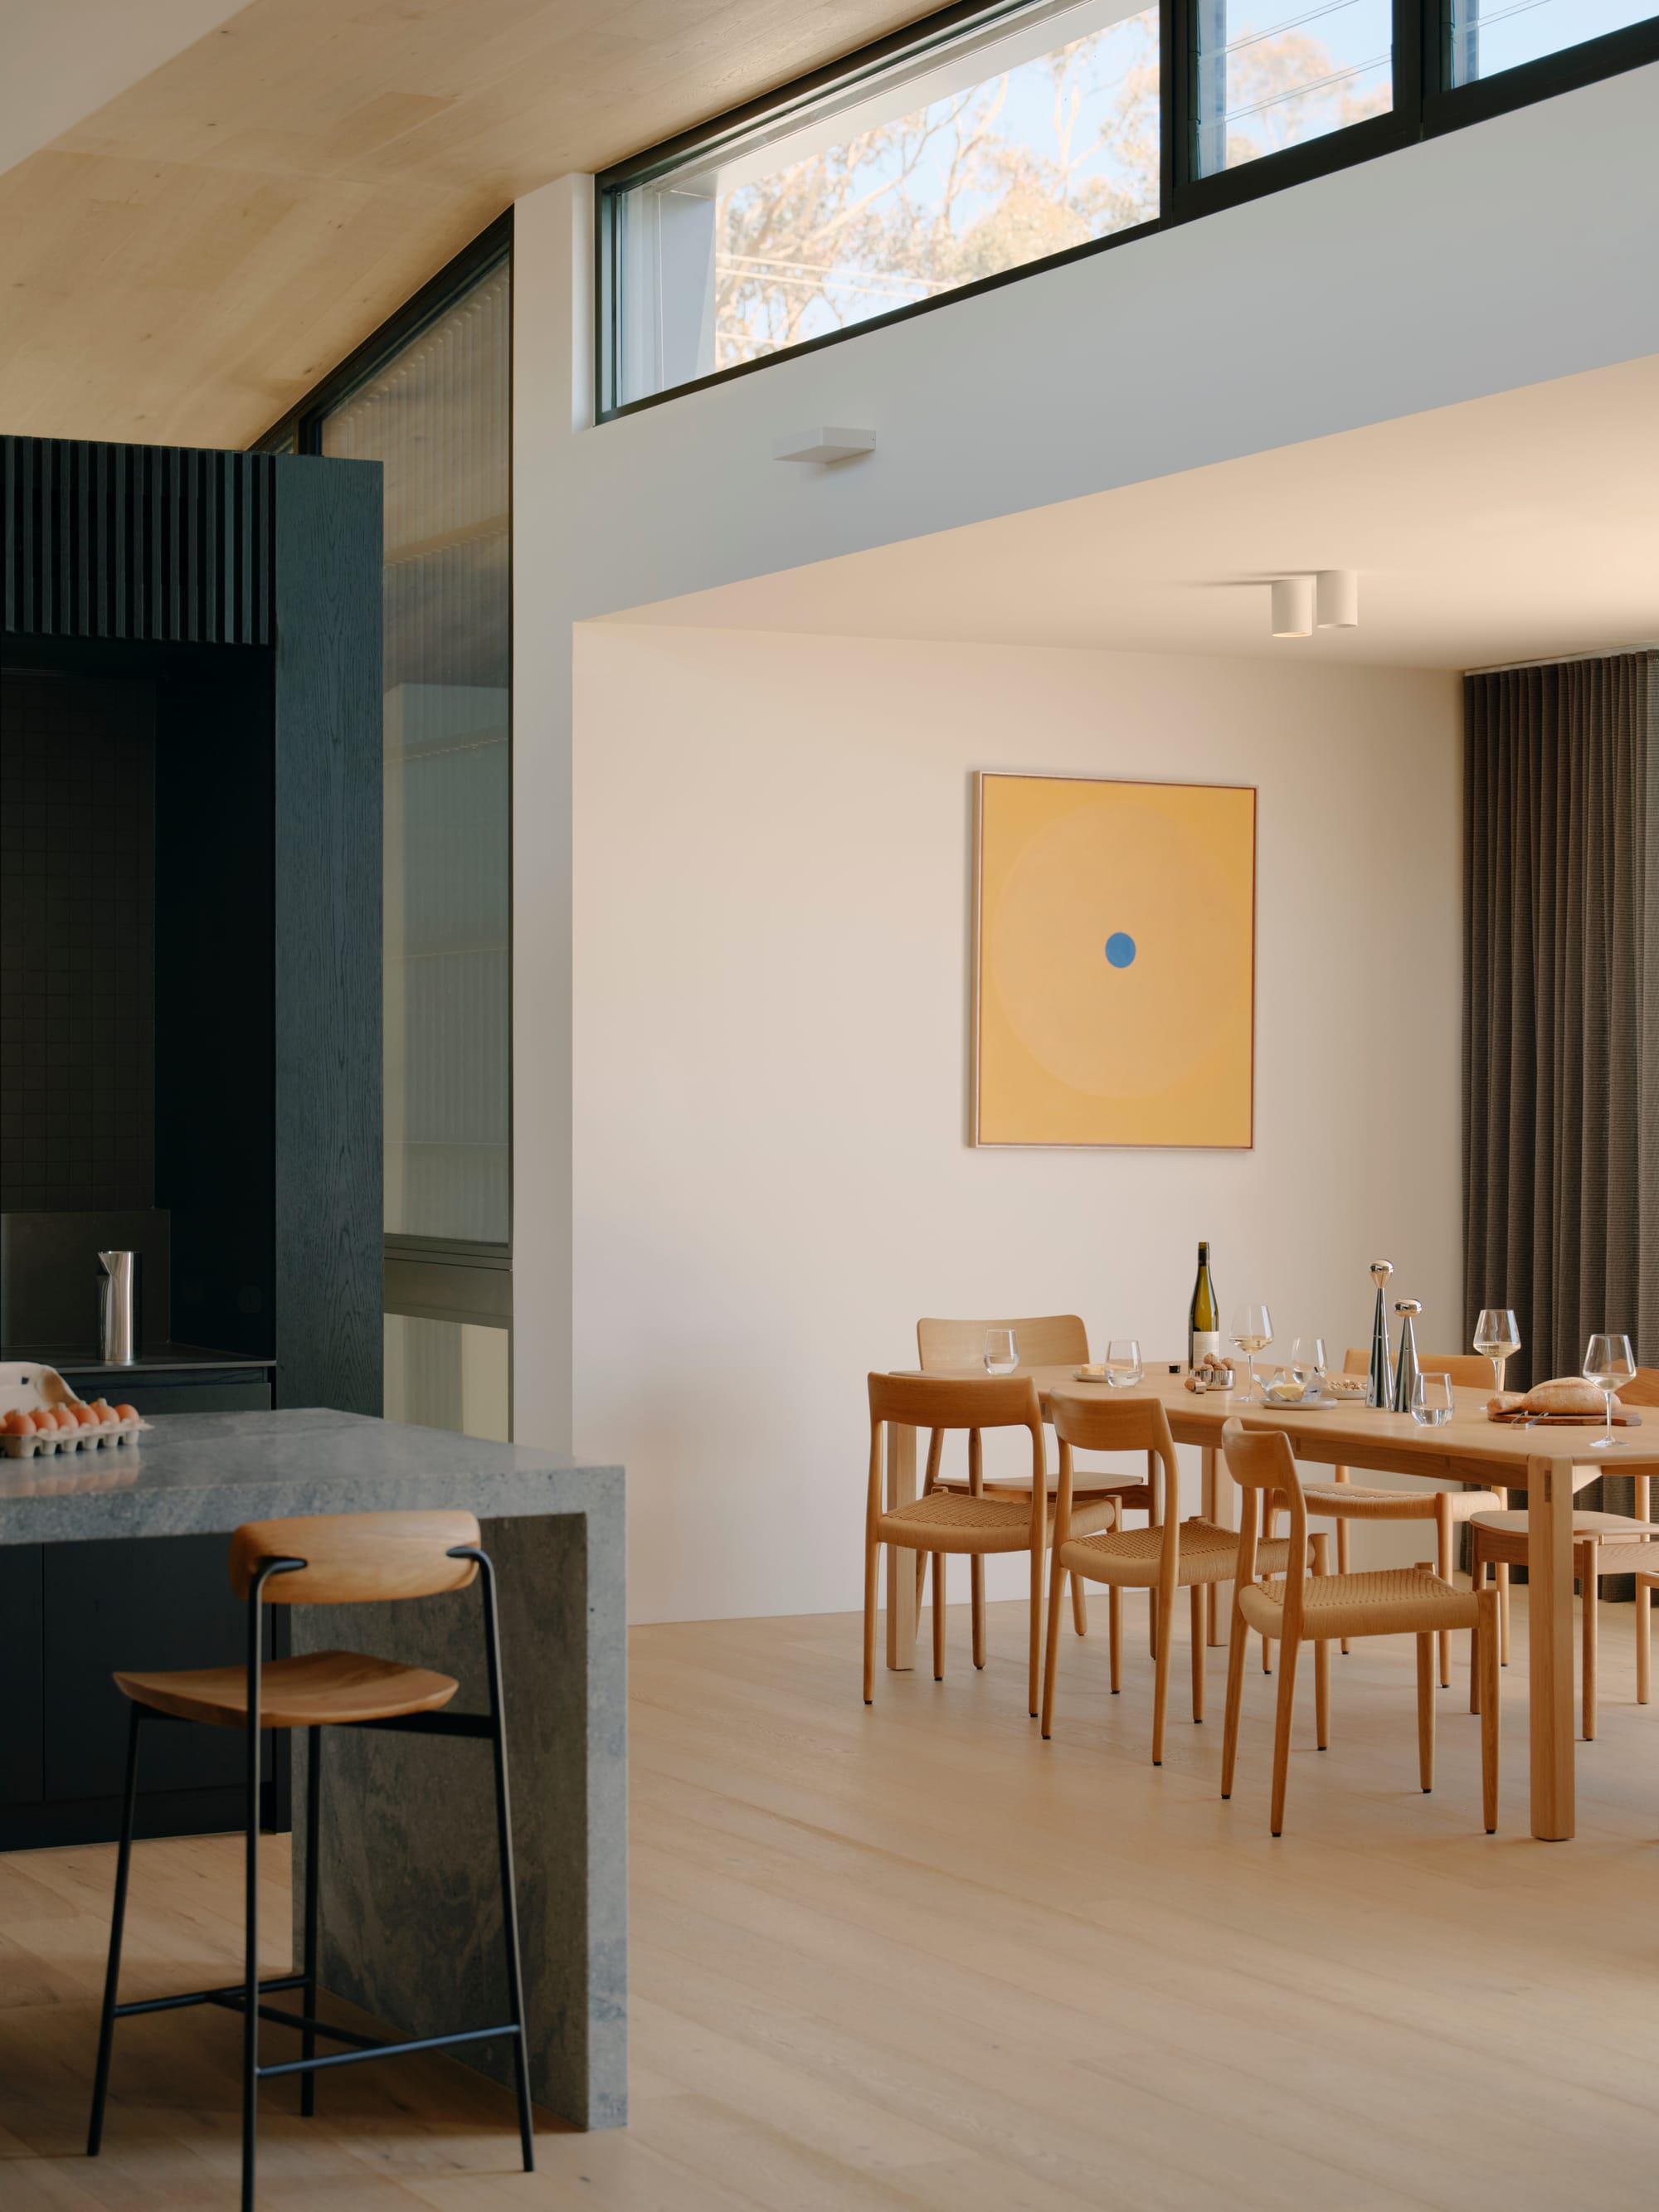 Courtside House by Tom Robertson Architects showing an interior shot of the dining and kitchen spaces